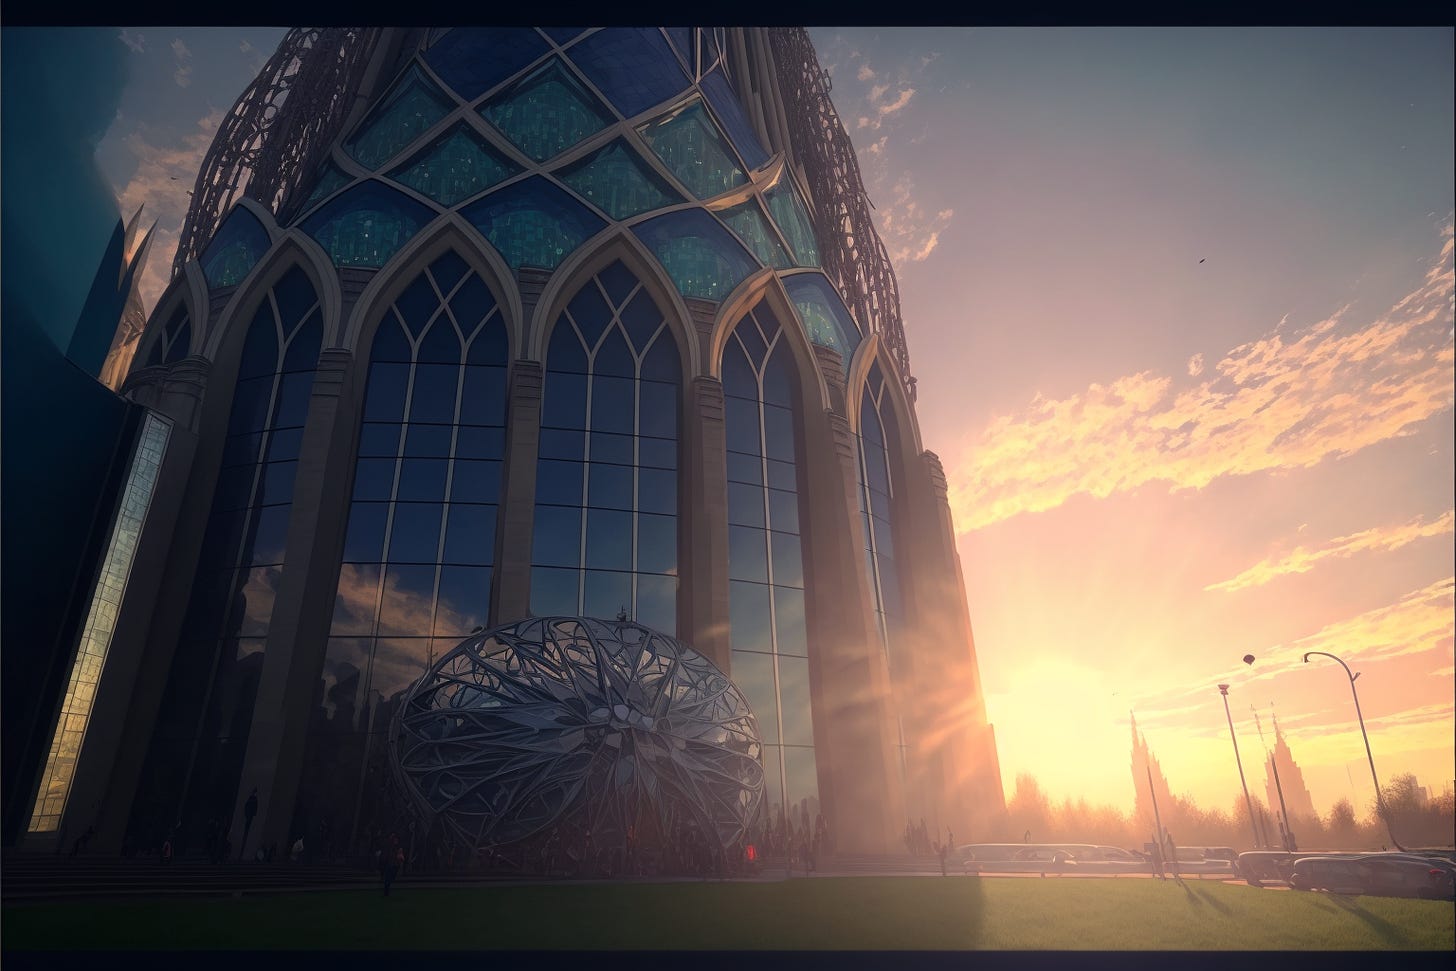 the sun setting behind an art nouveau skyscraper cathedral with stained glass windows